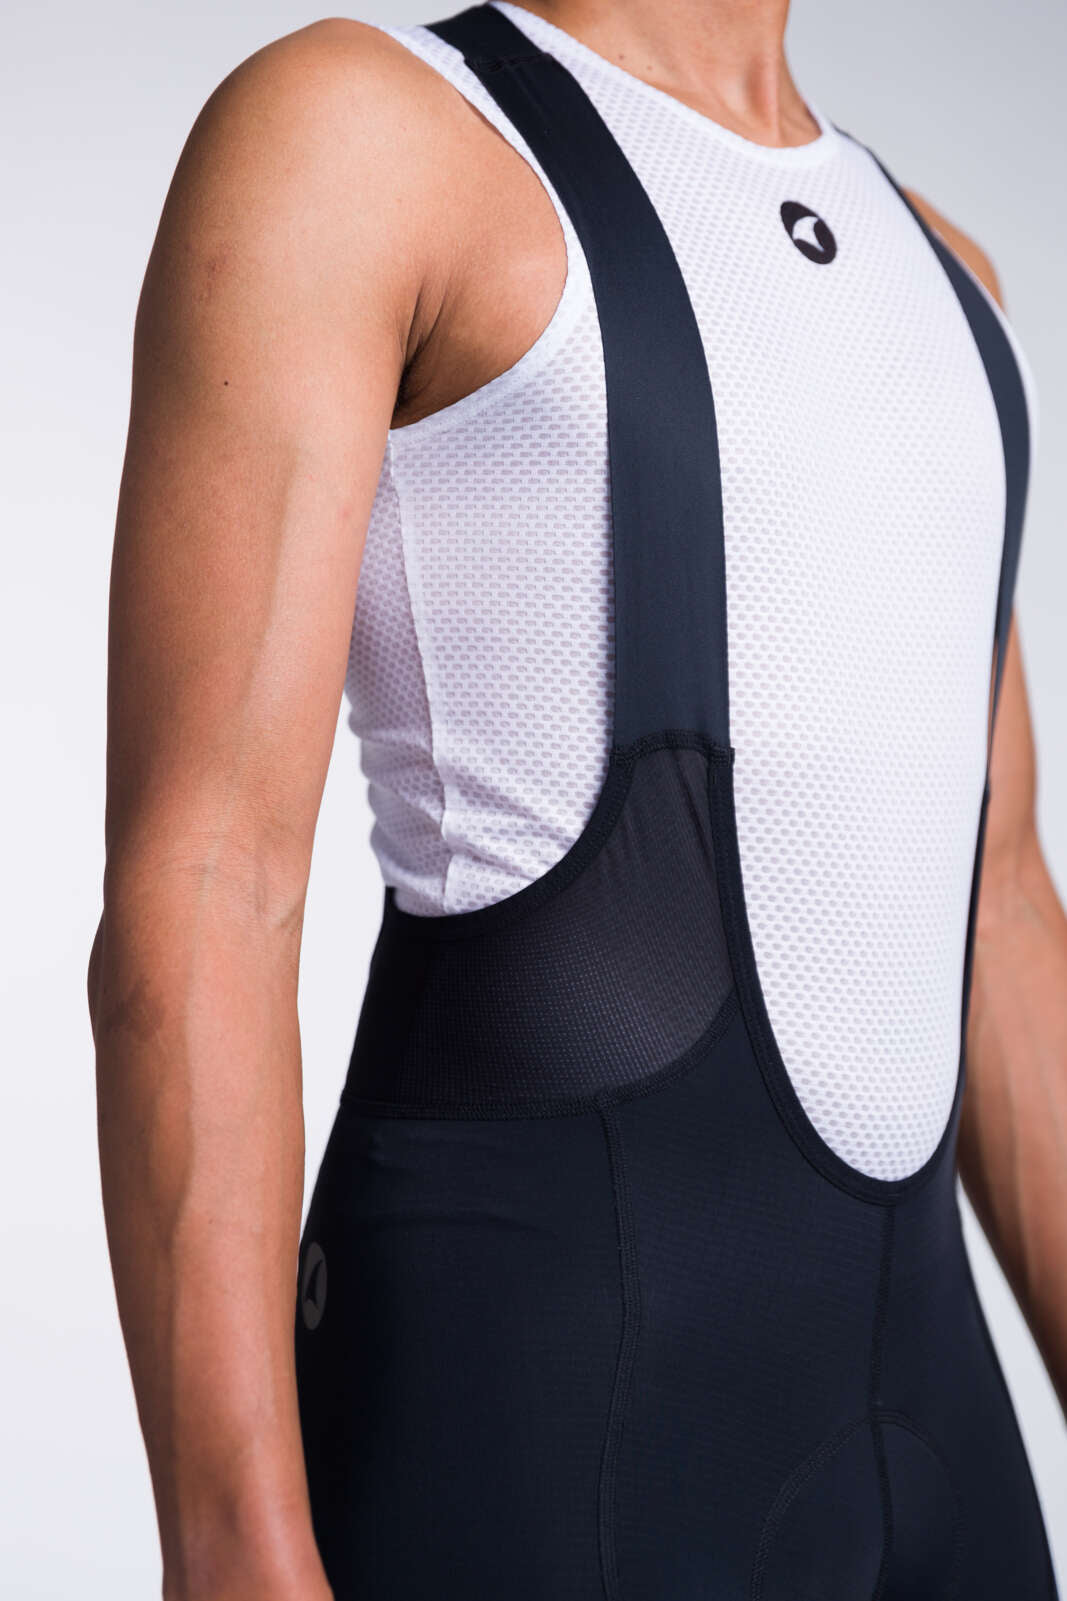 Men's Ascent Vector Pro Cycling Bibs - Mesh in Uppers